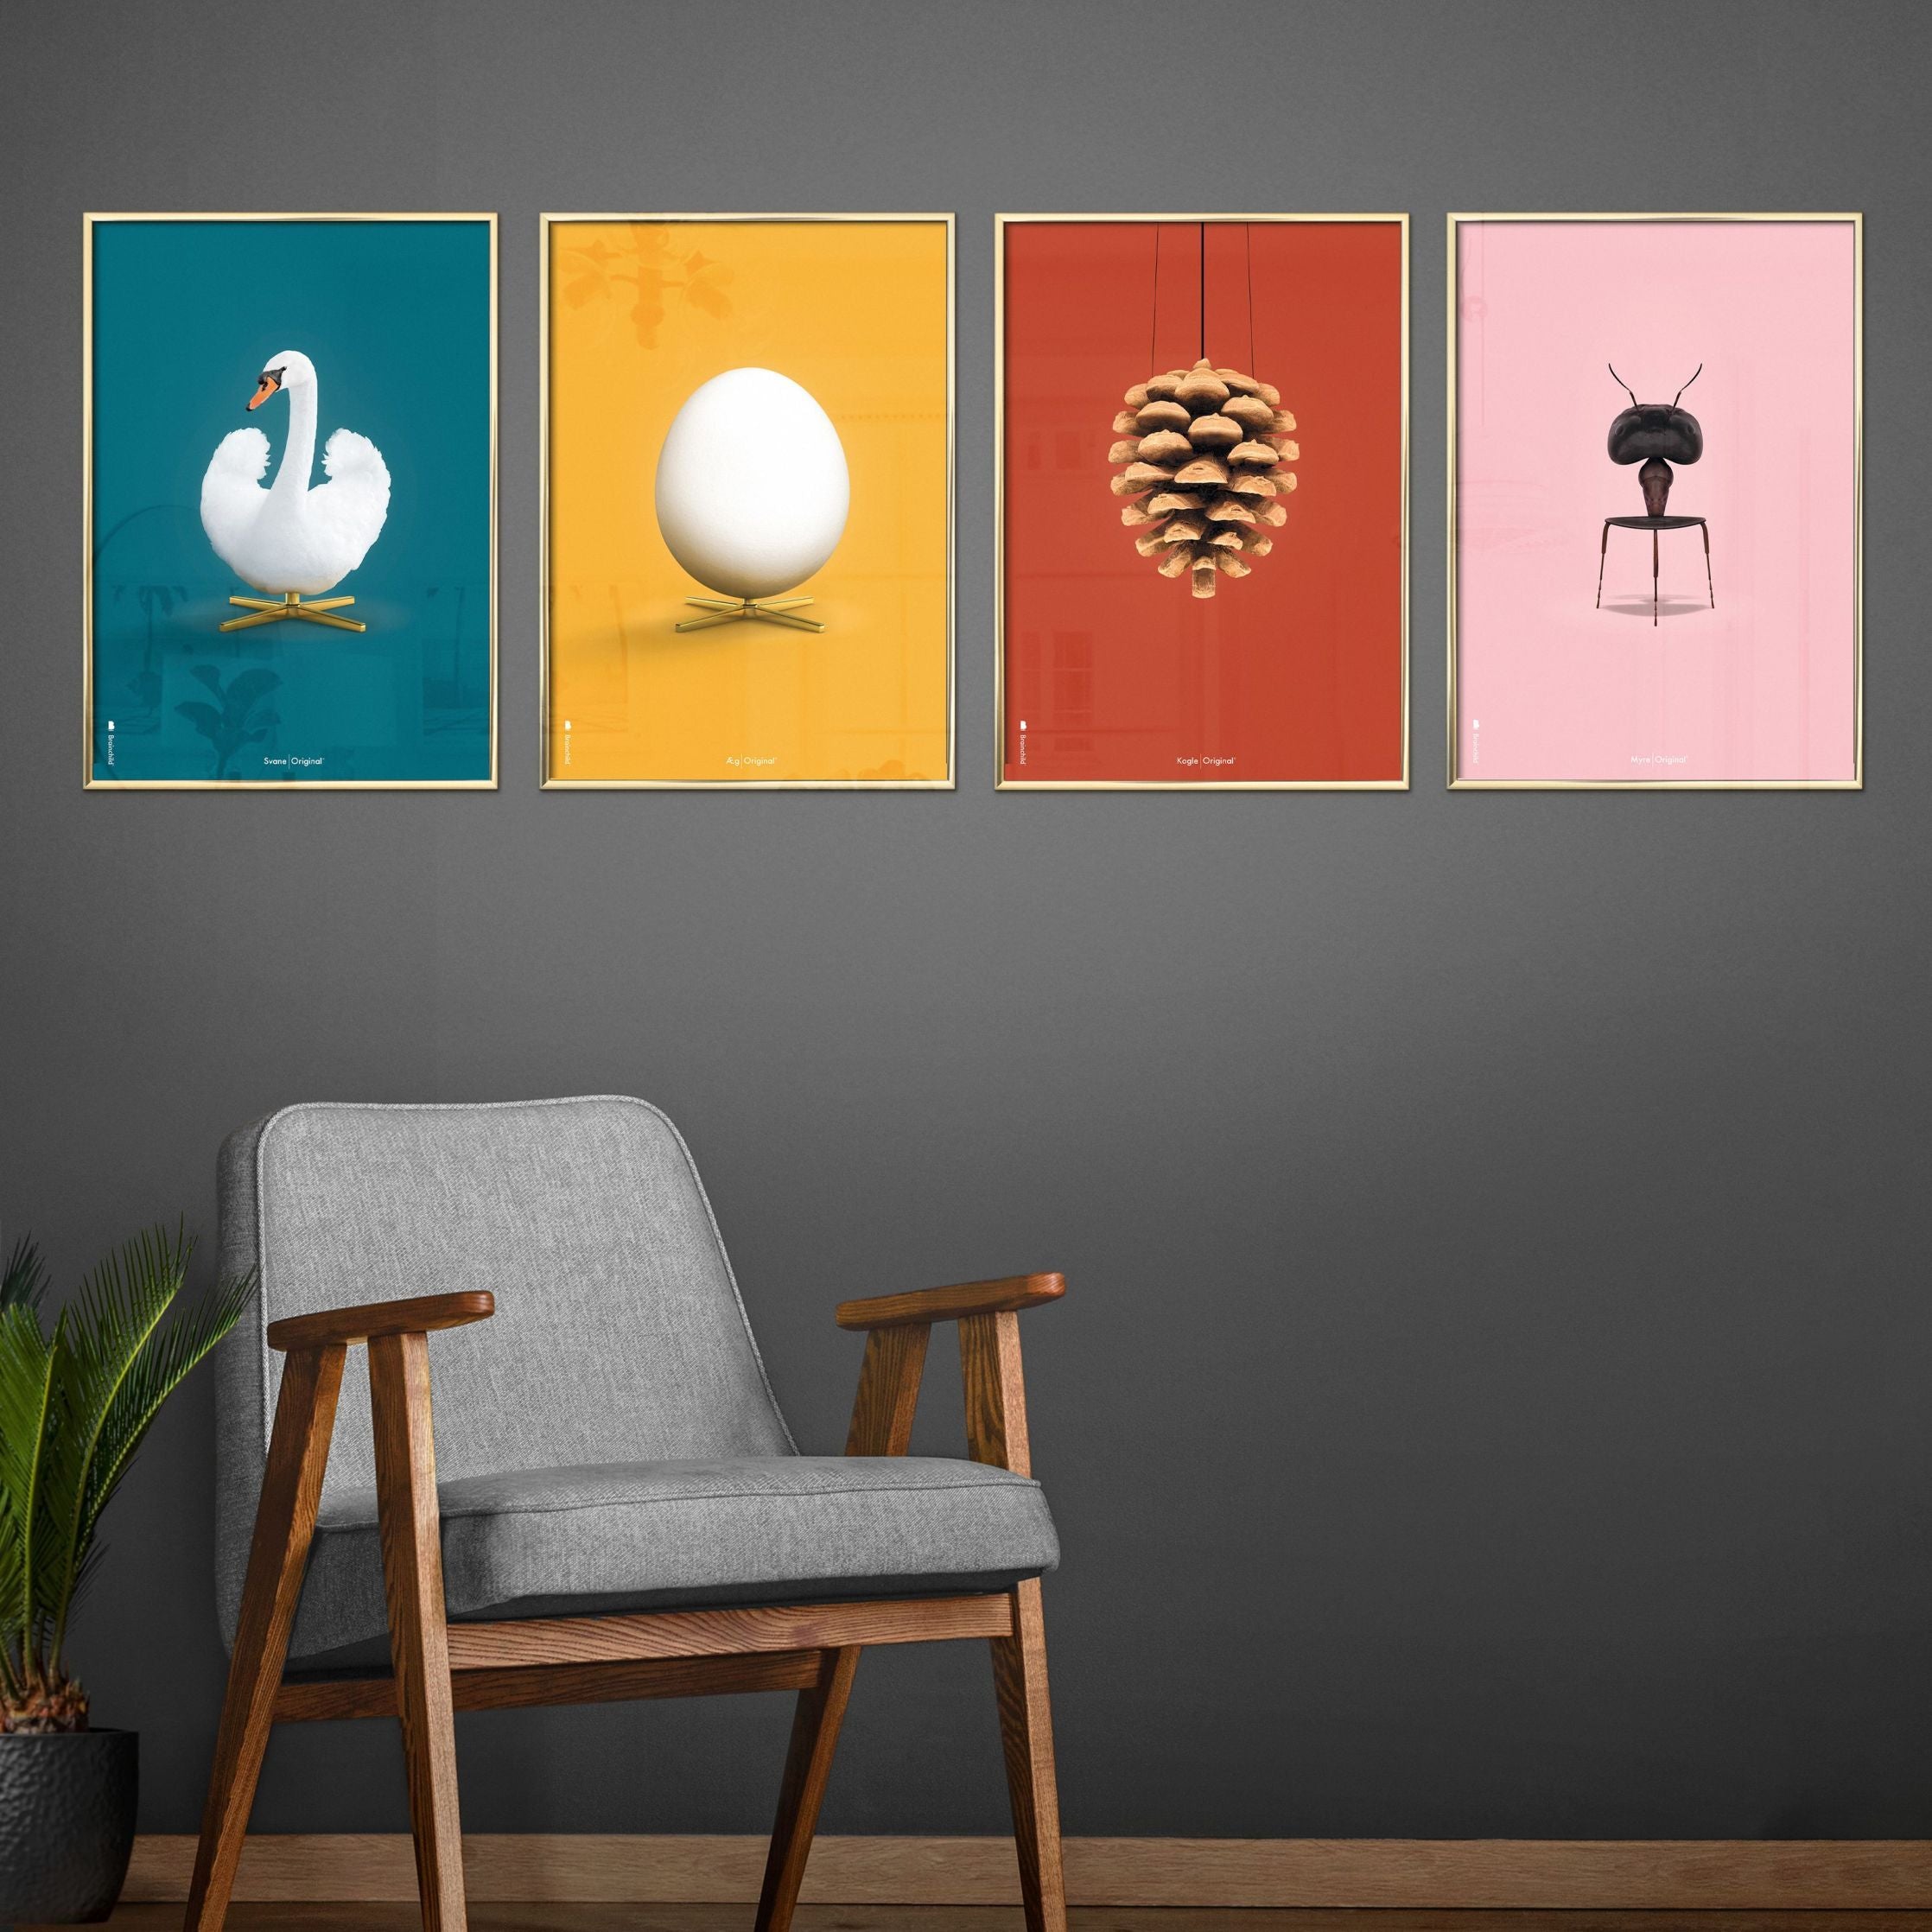 Brainchild Egg Classic Poster, Frame In Black Lacquered Wood A5, Yellow Background